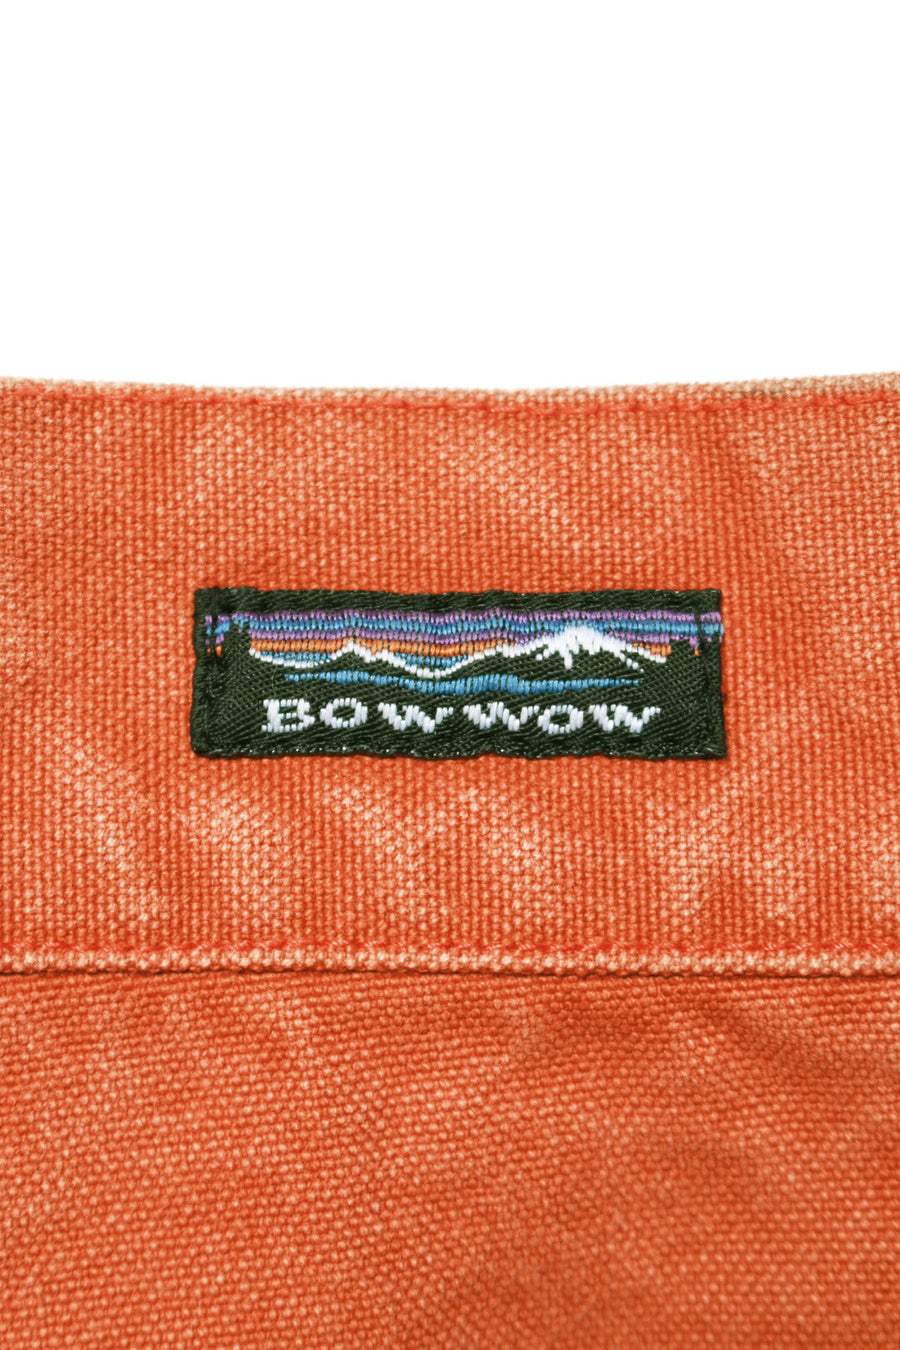 〈BOW WOW〉OUTDOOR SHORTS / ORANGE AGEING